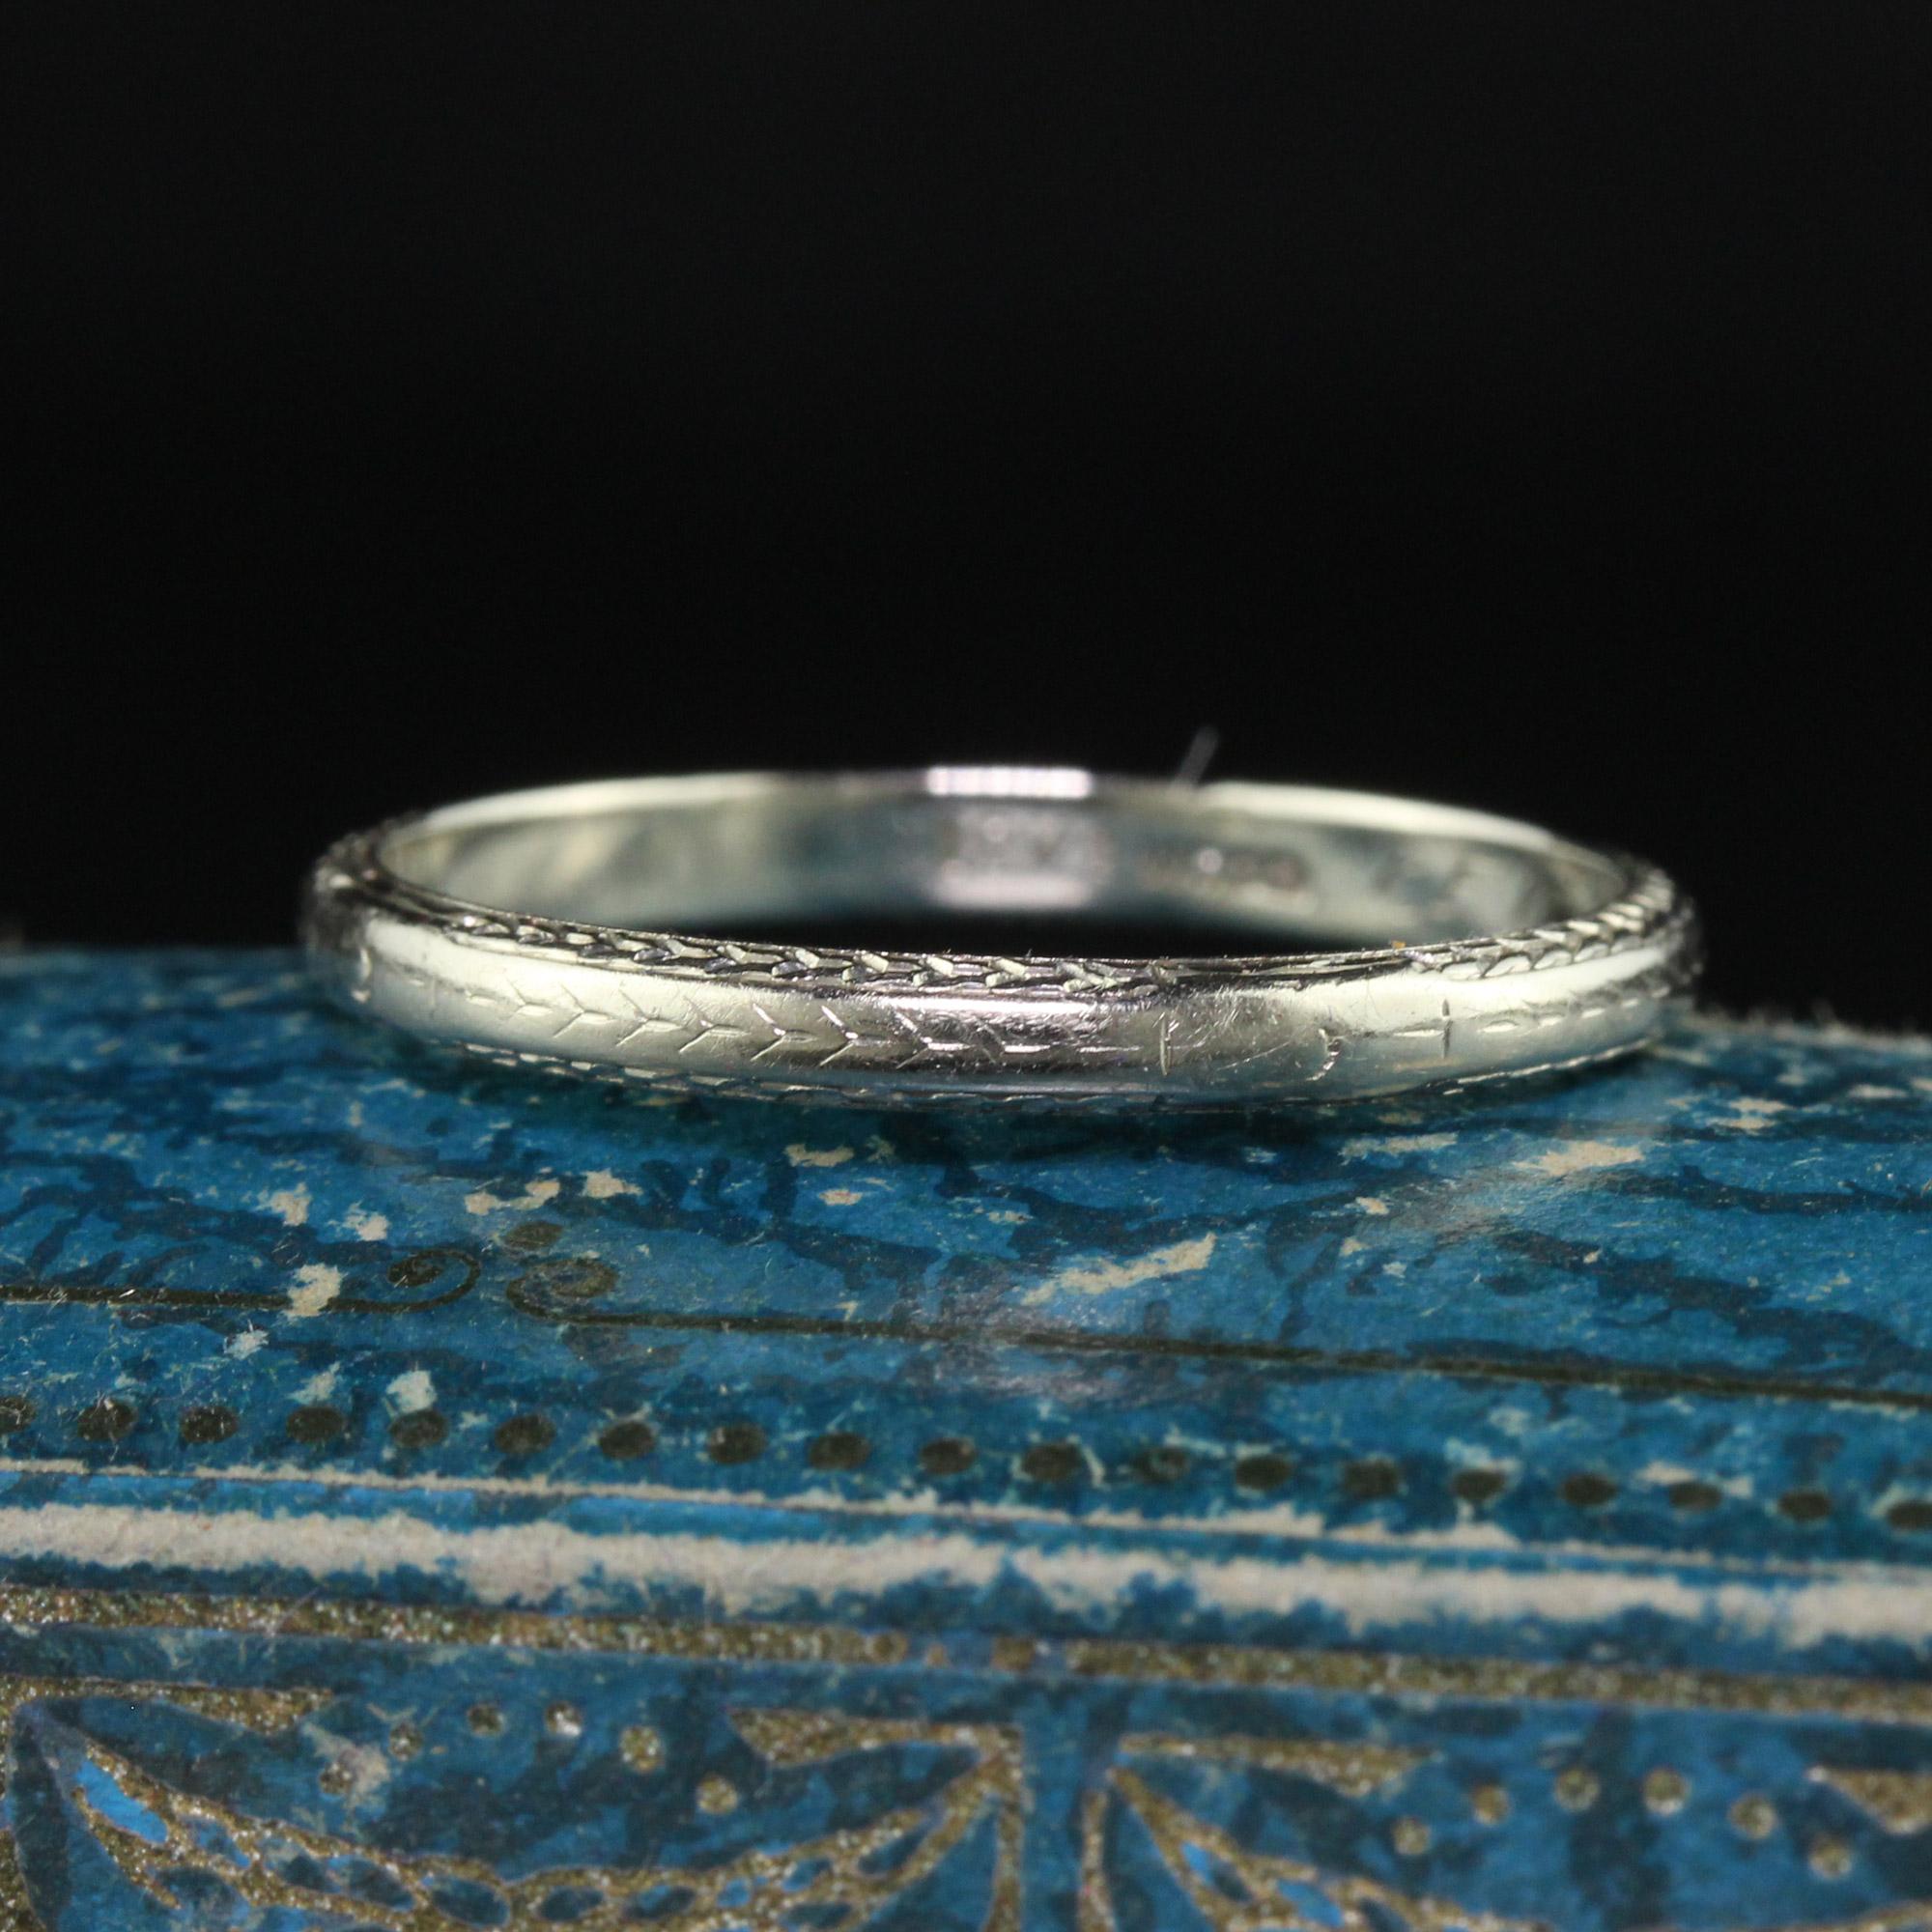 Beautiful Antique Art Deco Wood and Sons 18K White Gold Engraved Wedding Band - Size 8. This beautiful wedding band is crafted in 18k white gold. The ring has faint engravings on the top of the ring and clear engravings on both sides of the ring.